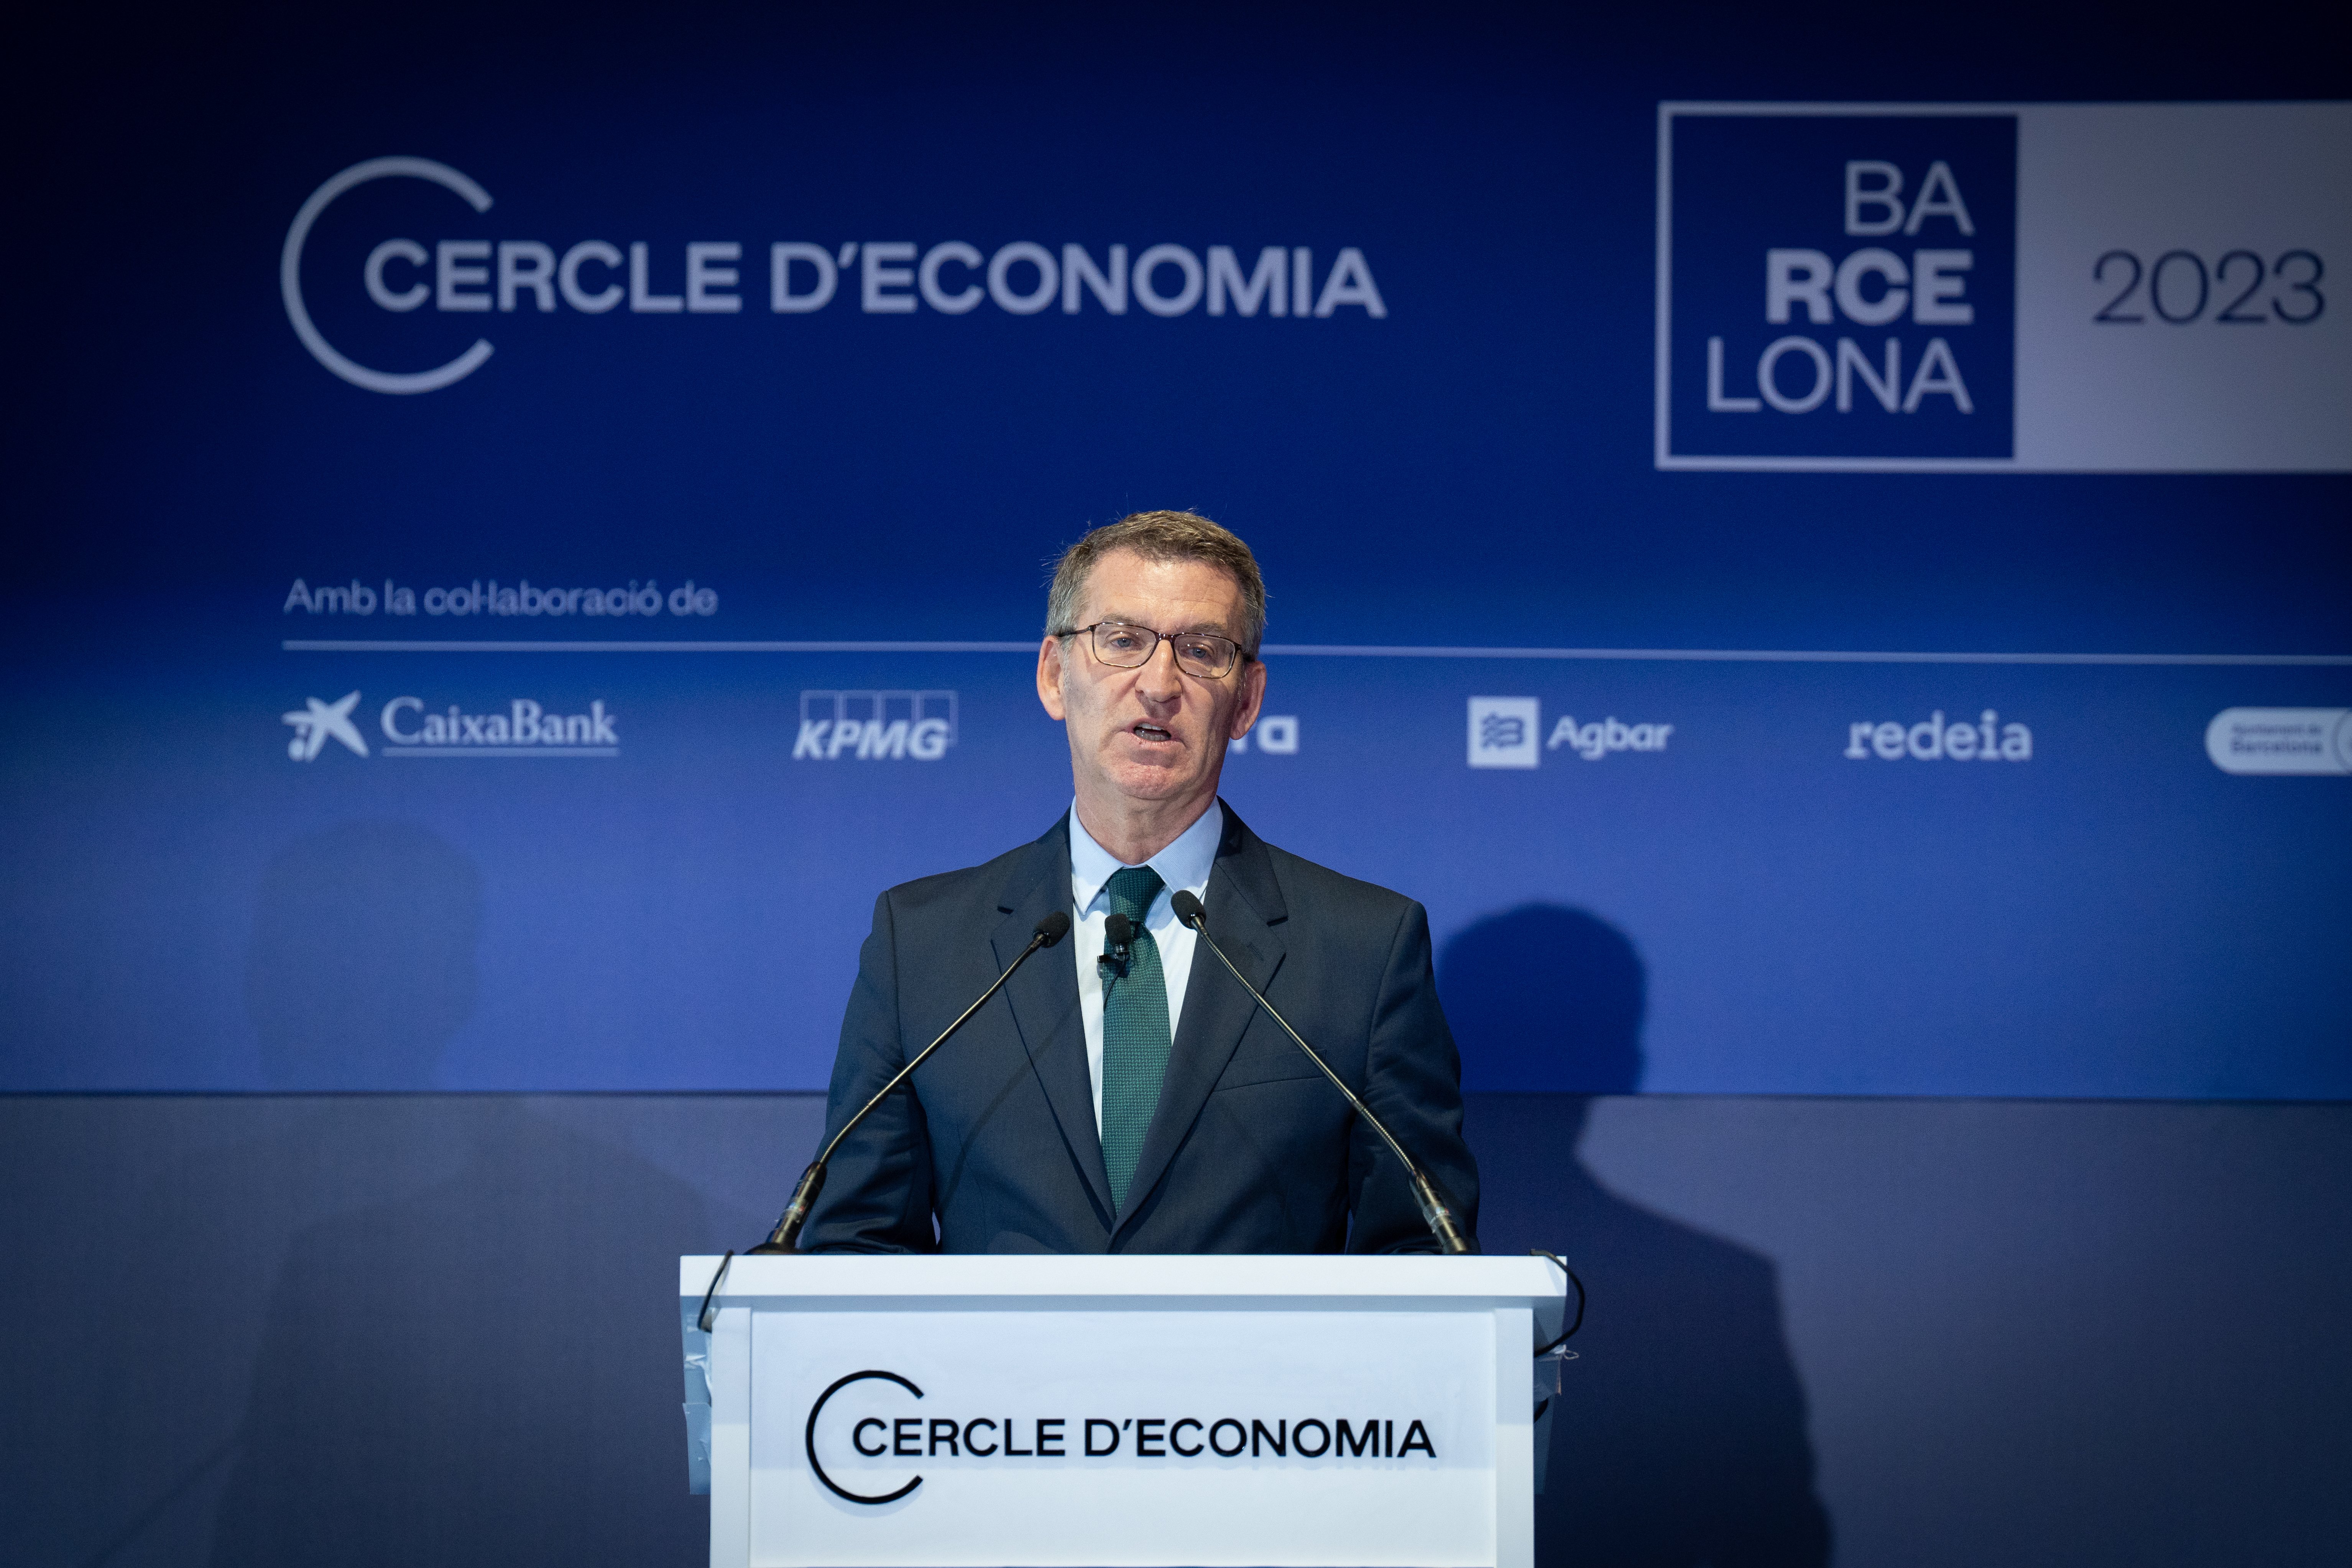 Feijóo recognizes the PP's error: "We treated Catalonia as a problem you couldn't address"